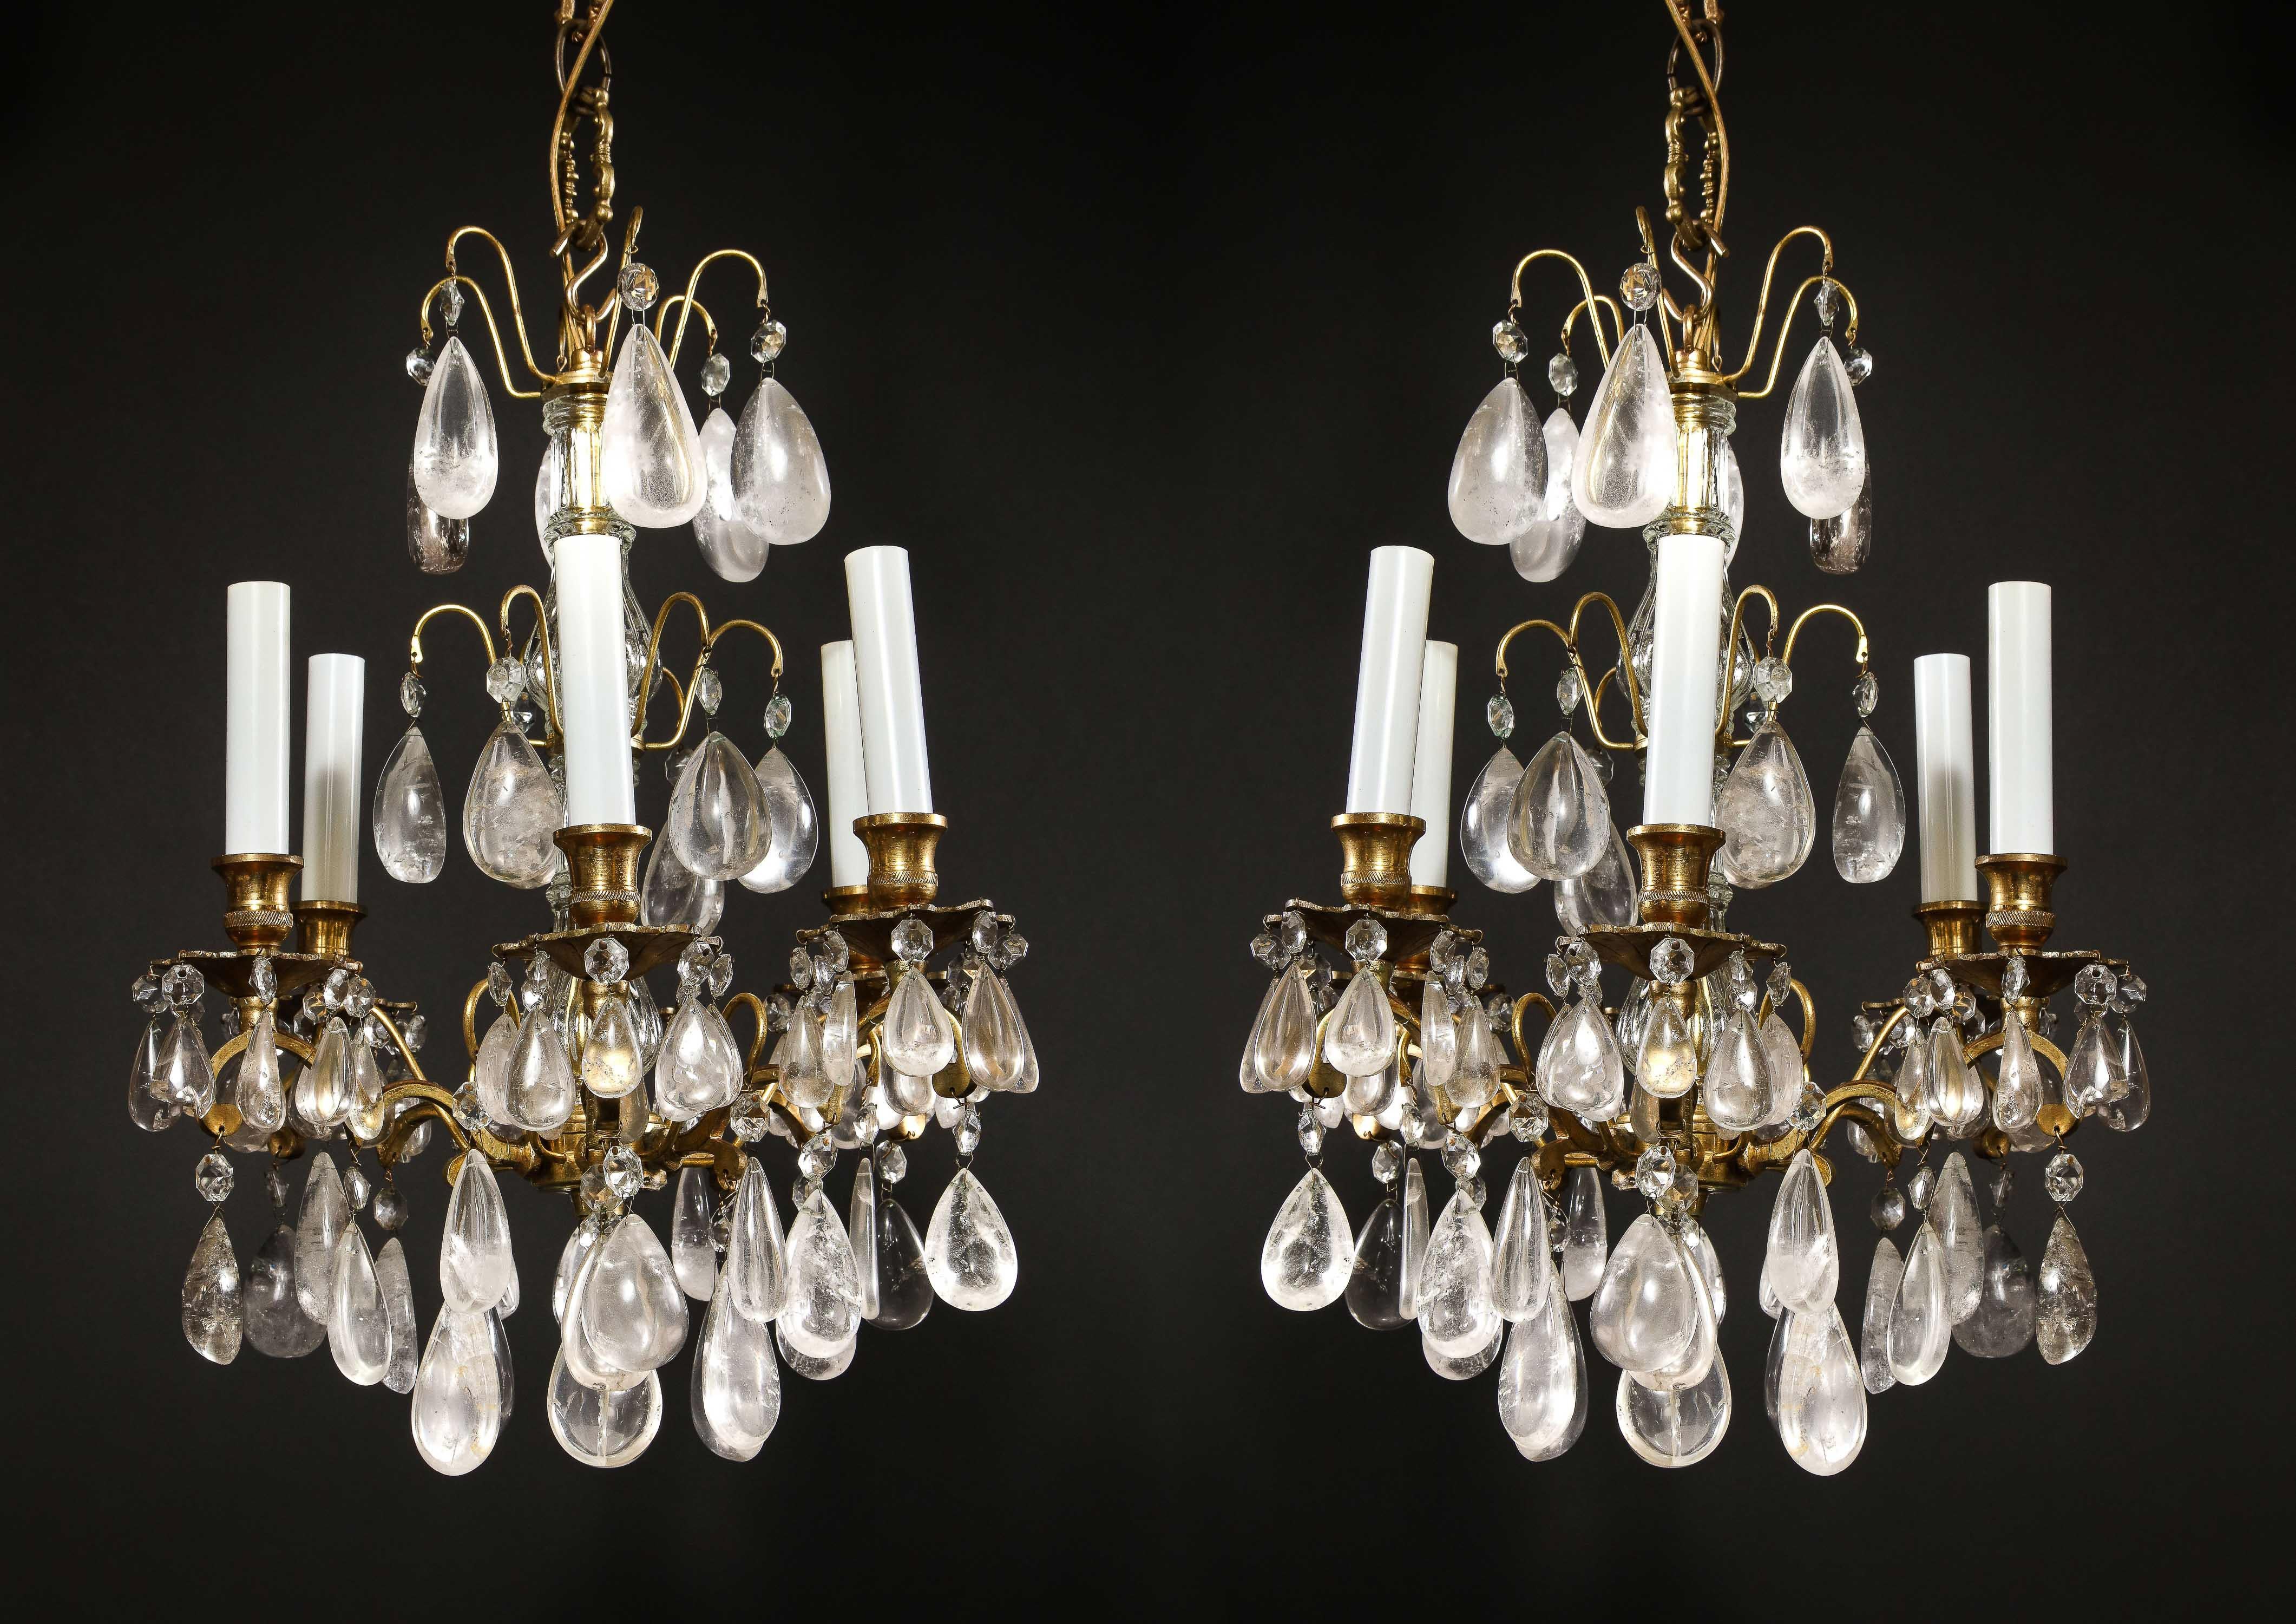 A pair of continental Louis XVI style bronze and rock crystal multi light triple tier chandeliers embellished with cut rock crystal prisms.